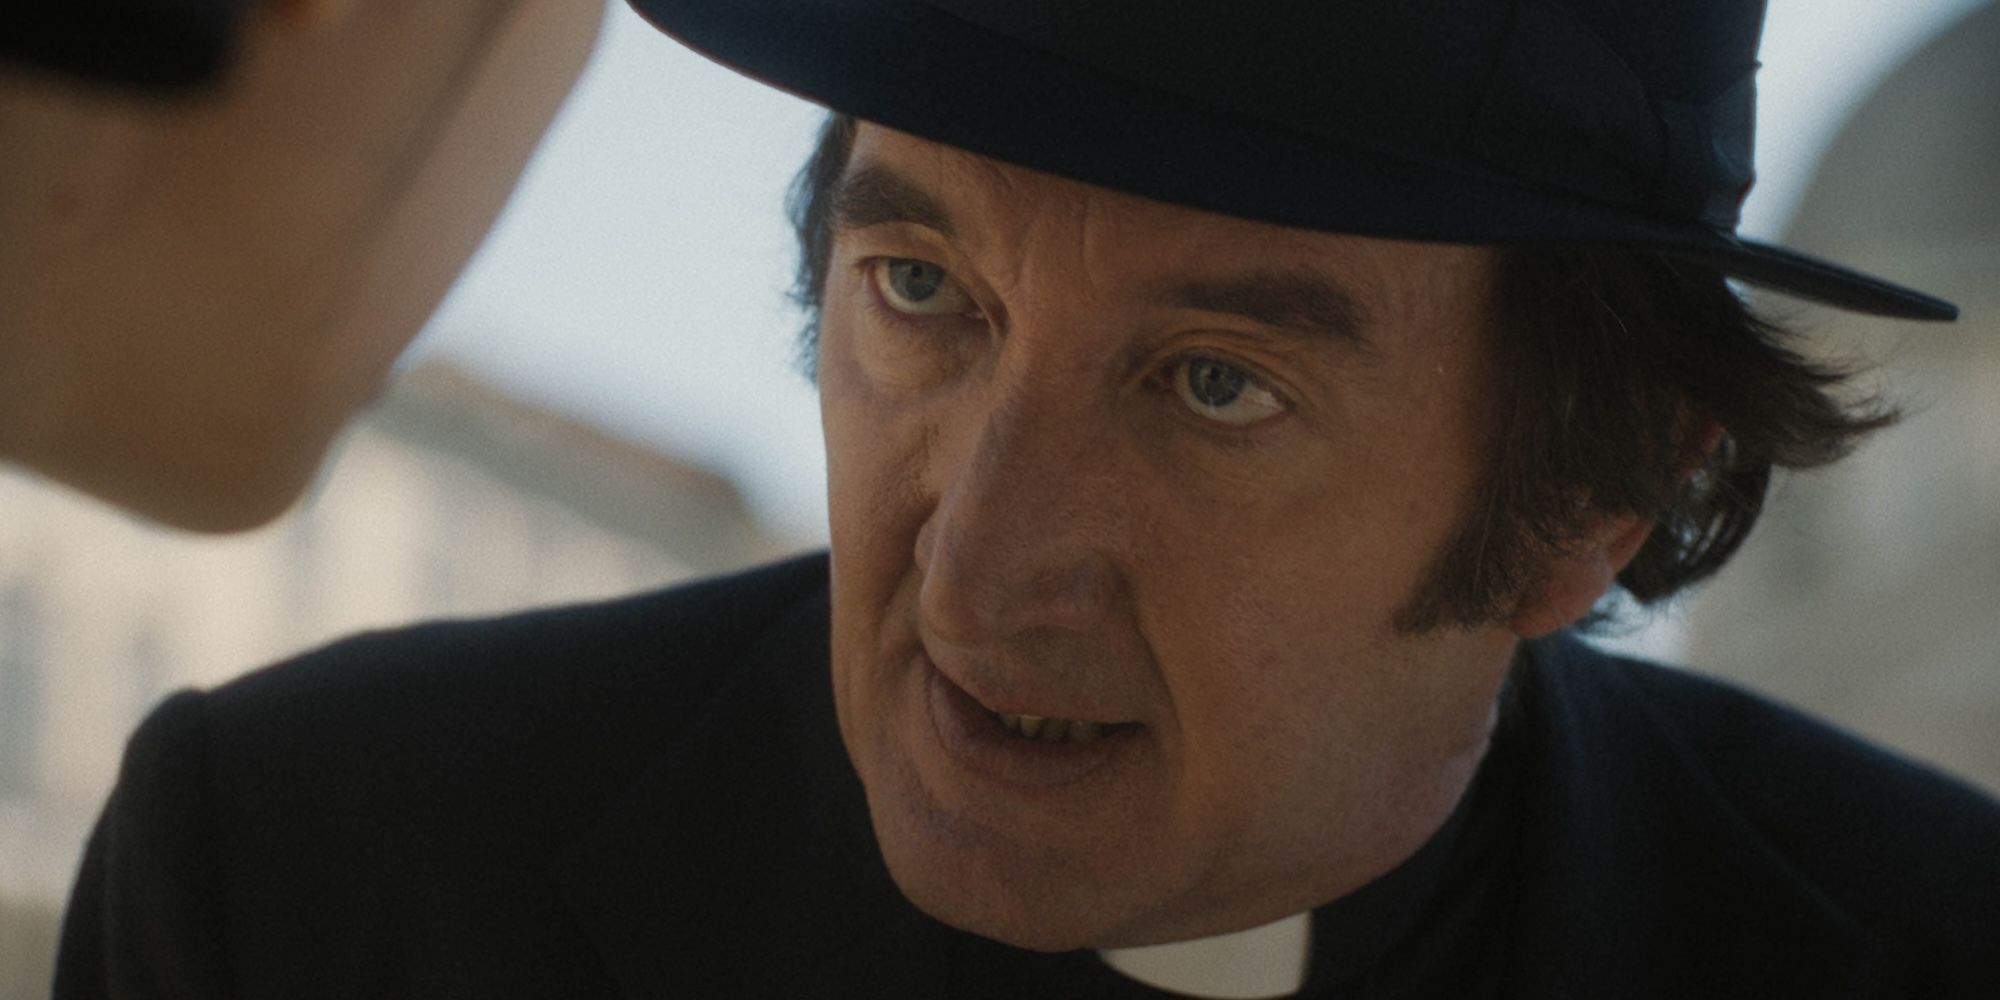 Father Brennan looking stressed while talking to someone in The First Omen movie